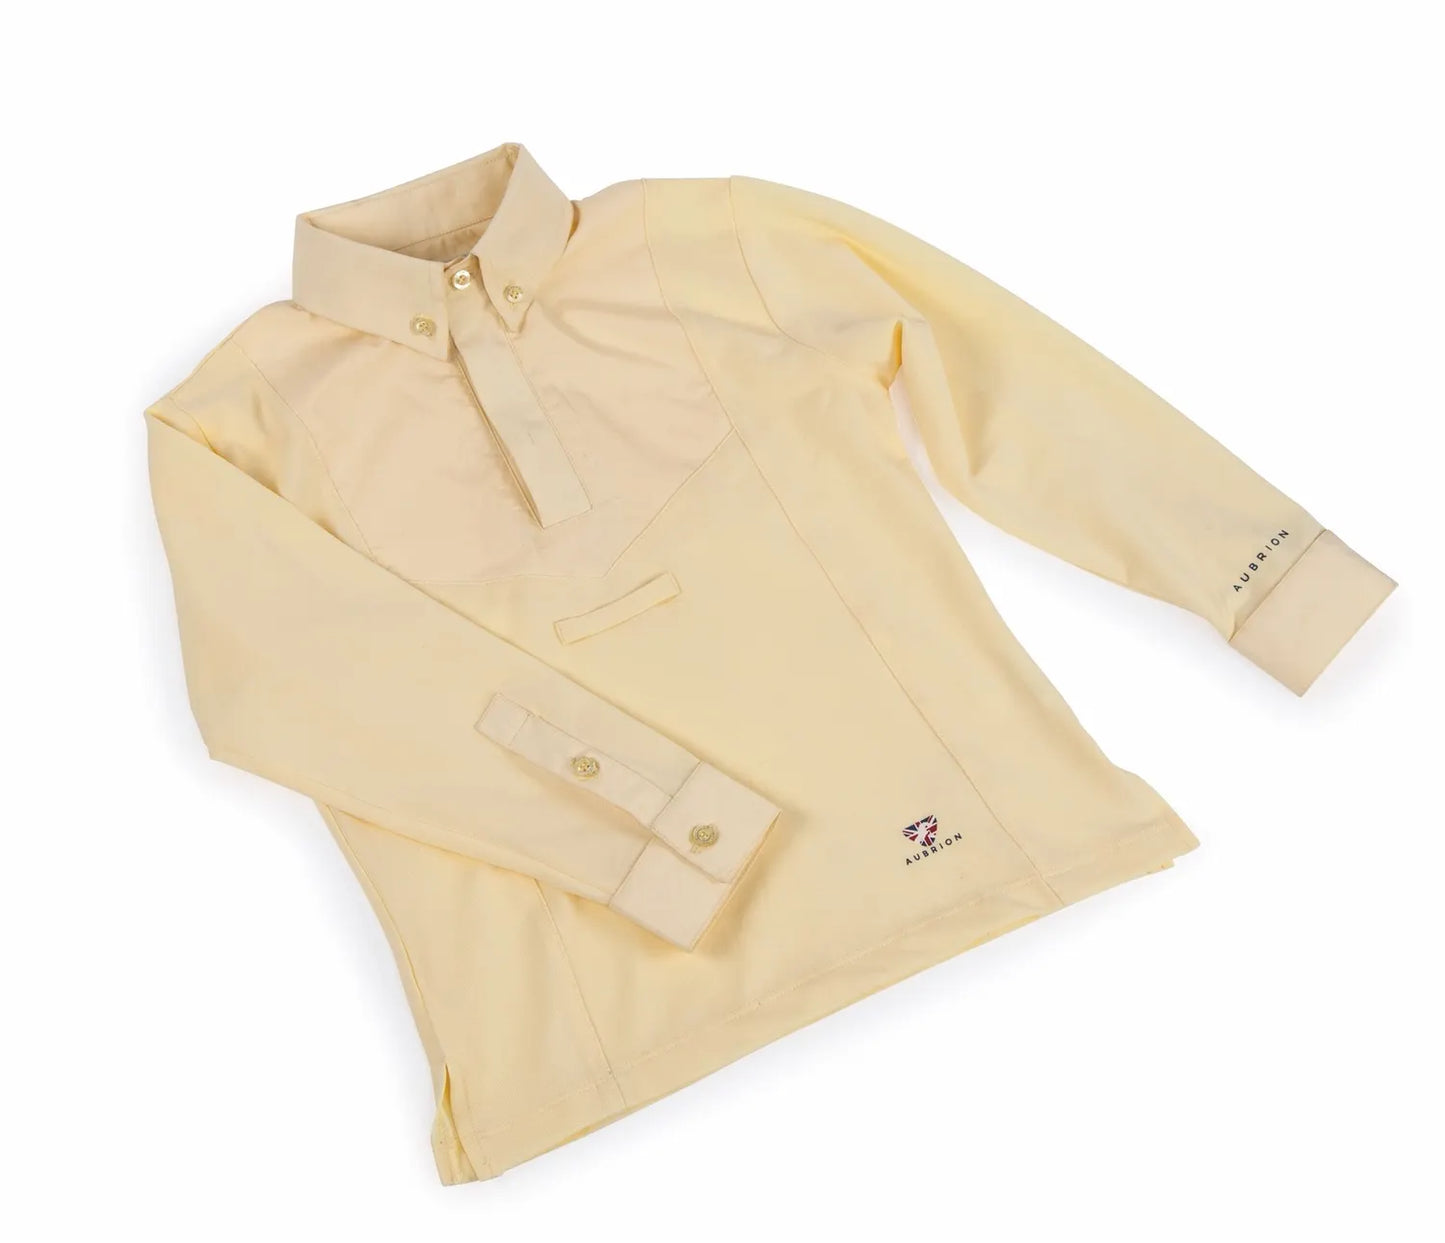 Shires Aubrion Long Sleeve Tie Shirt - Child